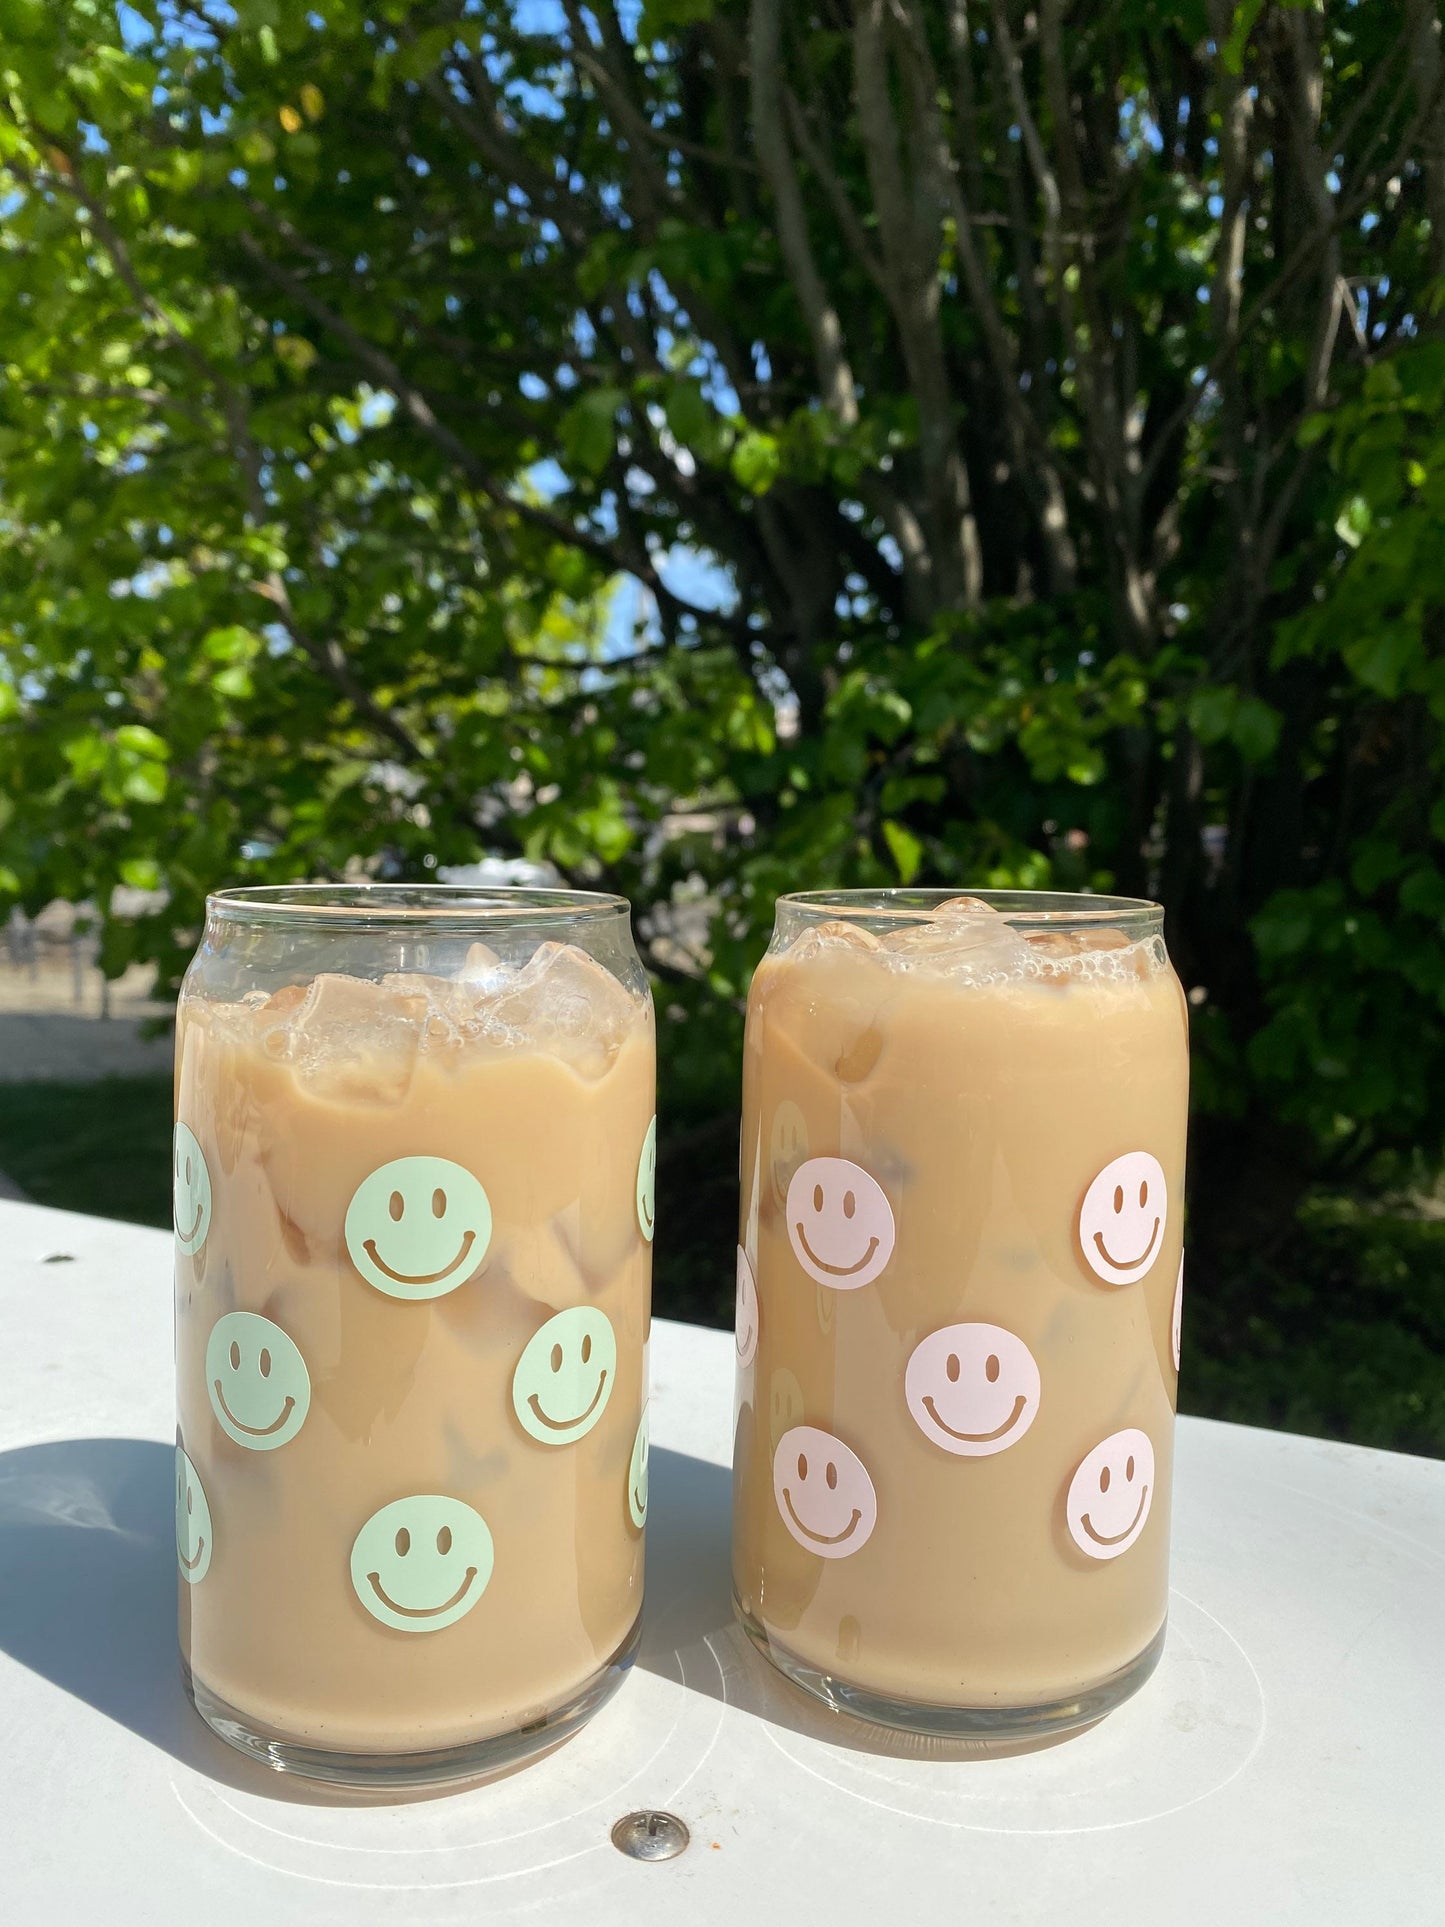 Pastel Happy Face Tumbler Cup with Handle